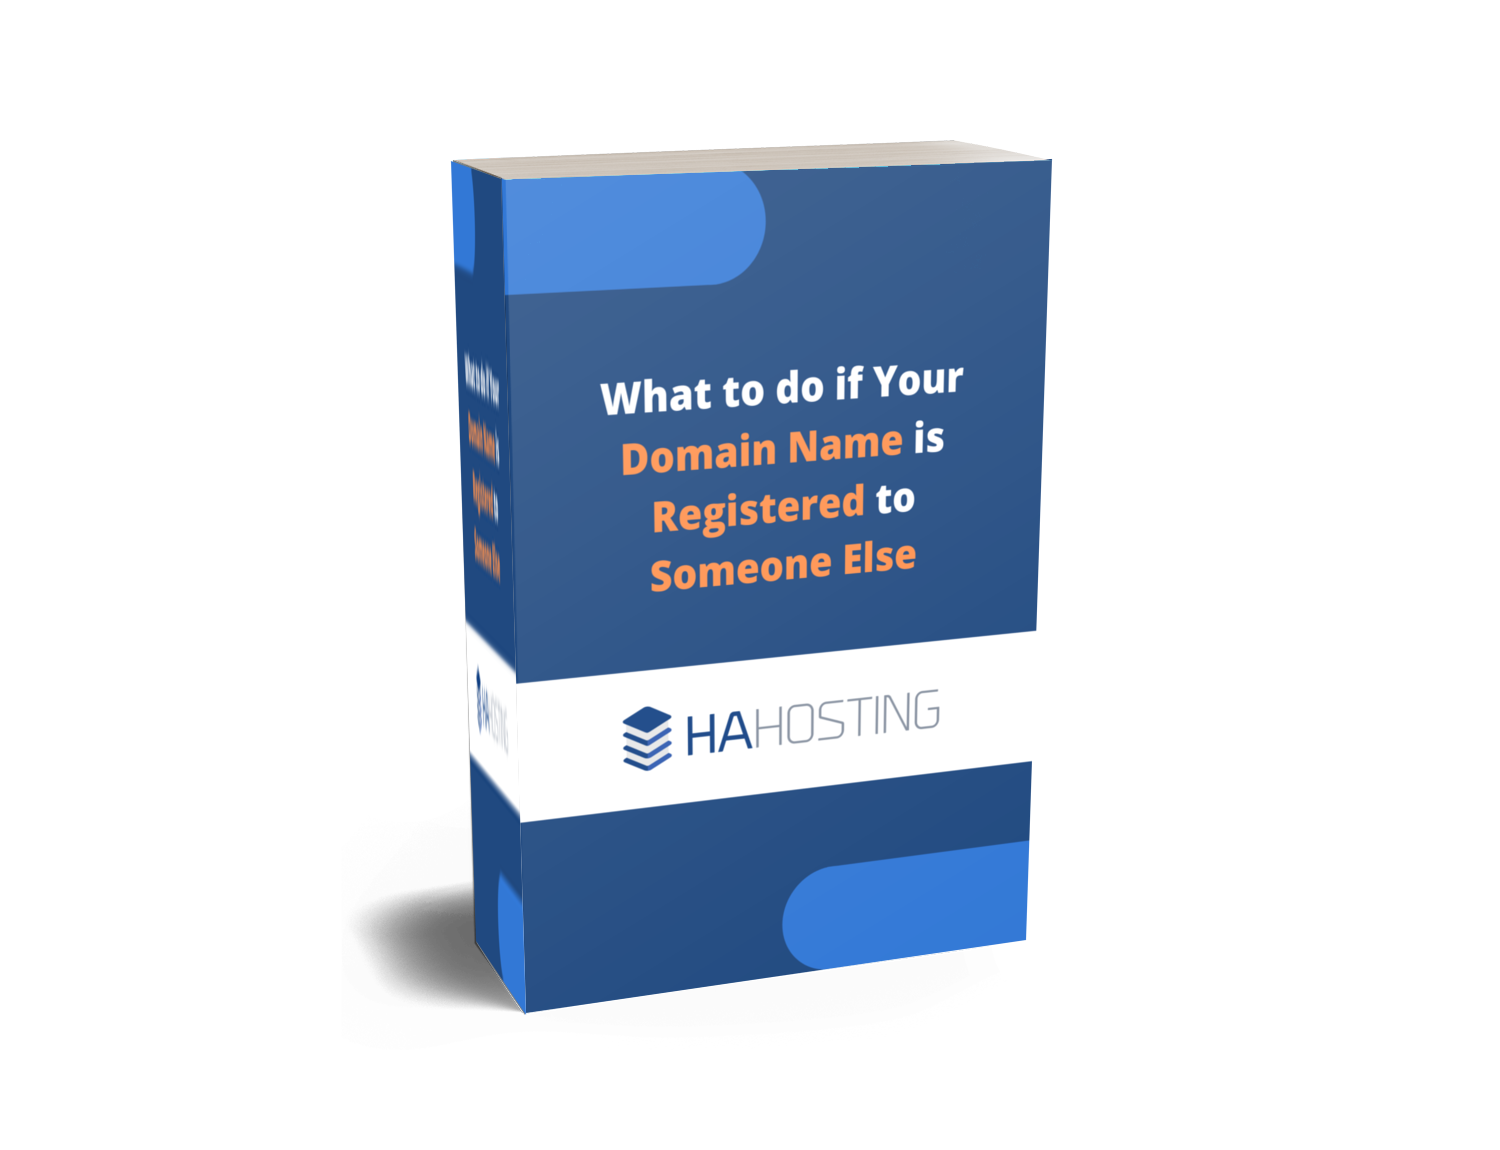 What to do if your domain name is registered to someone else?